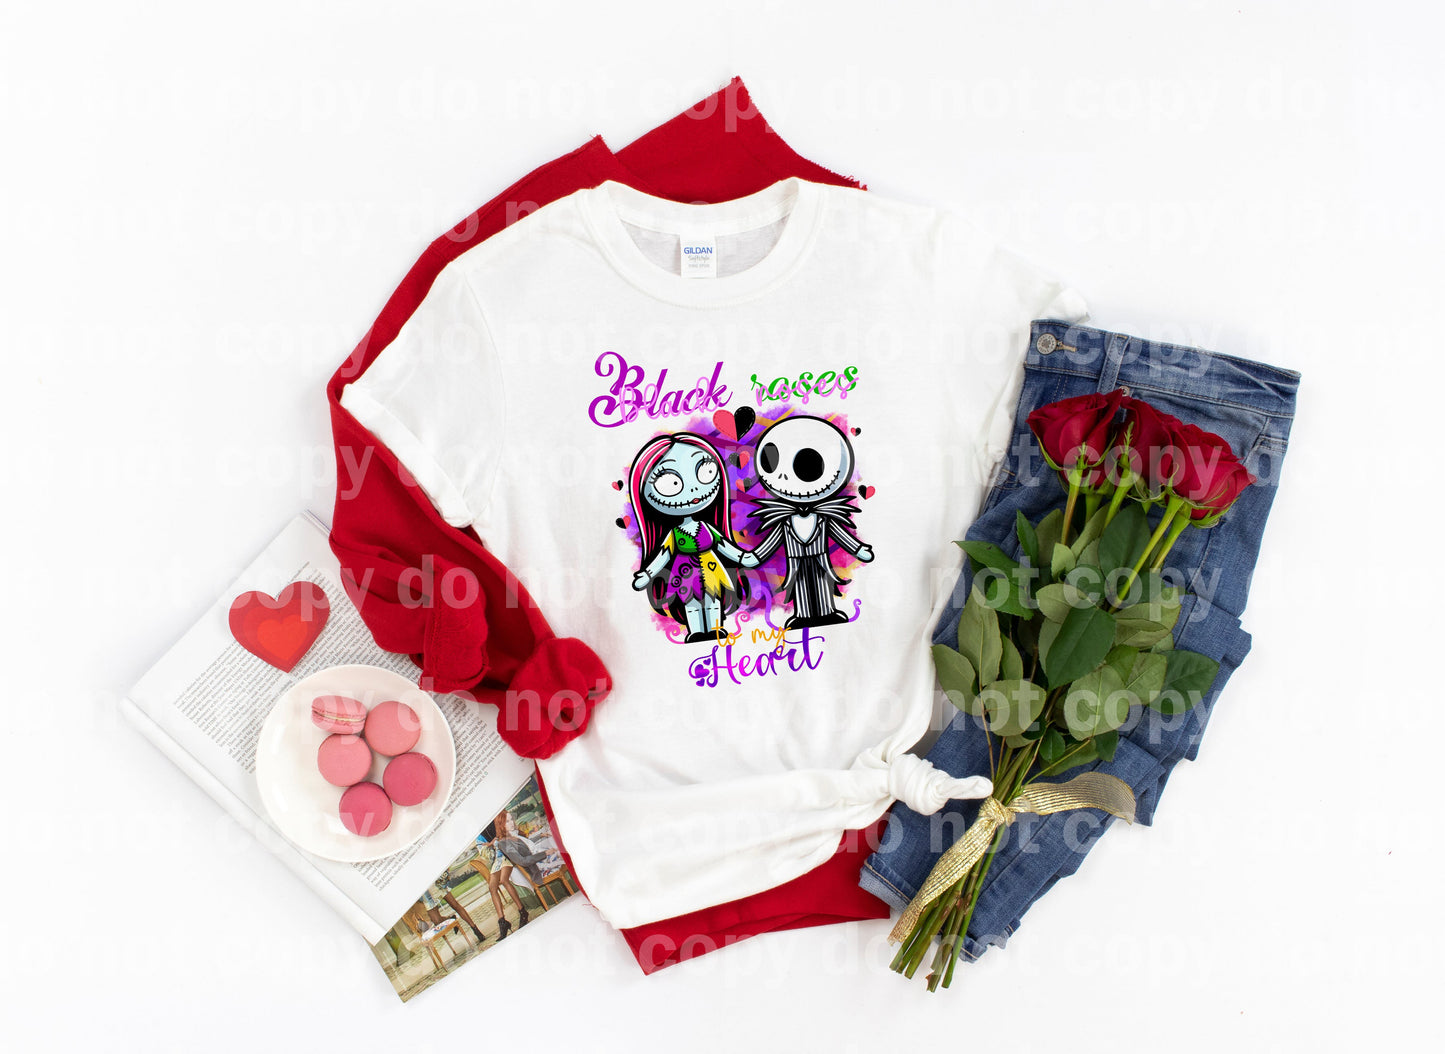 Black Roses To My Heart Jack Sally with Pocket Option Dream Print or Sublimation Print